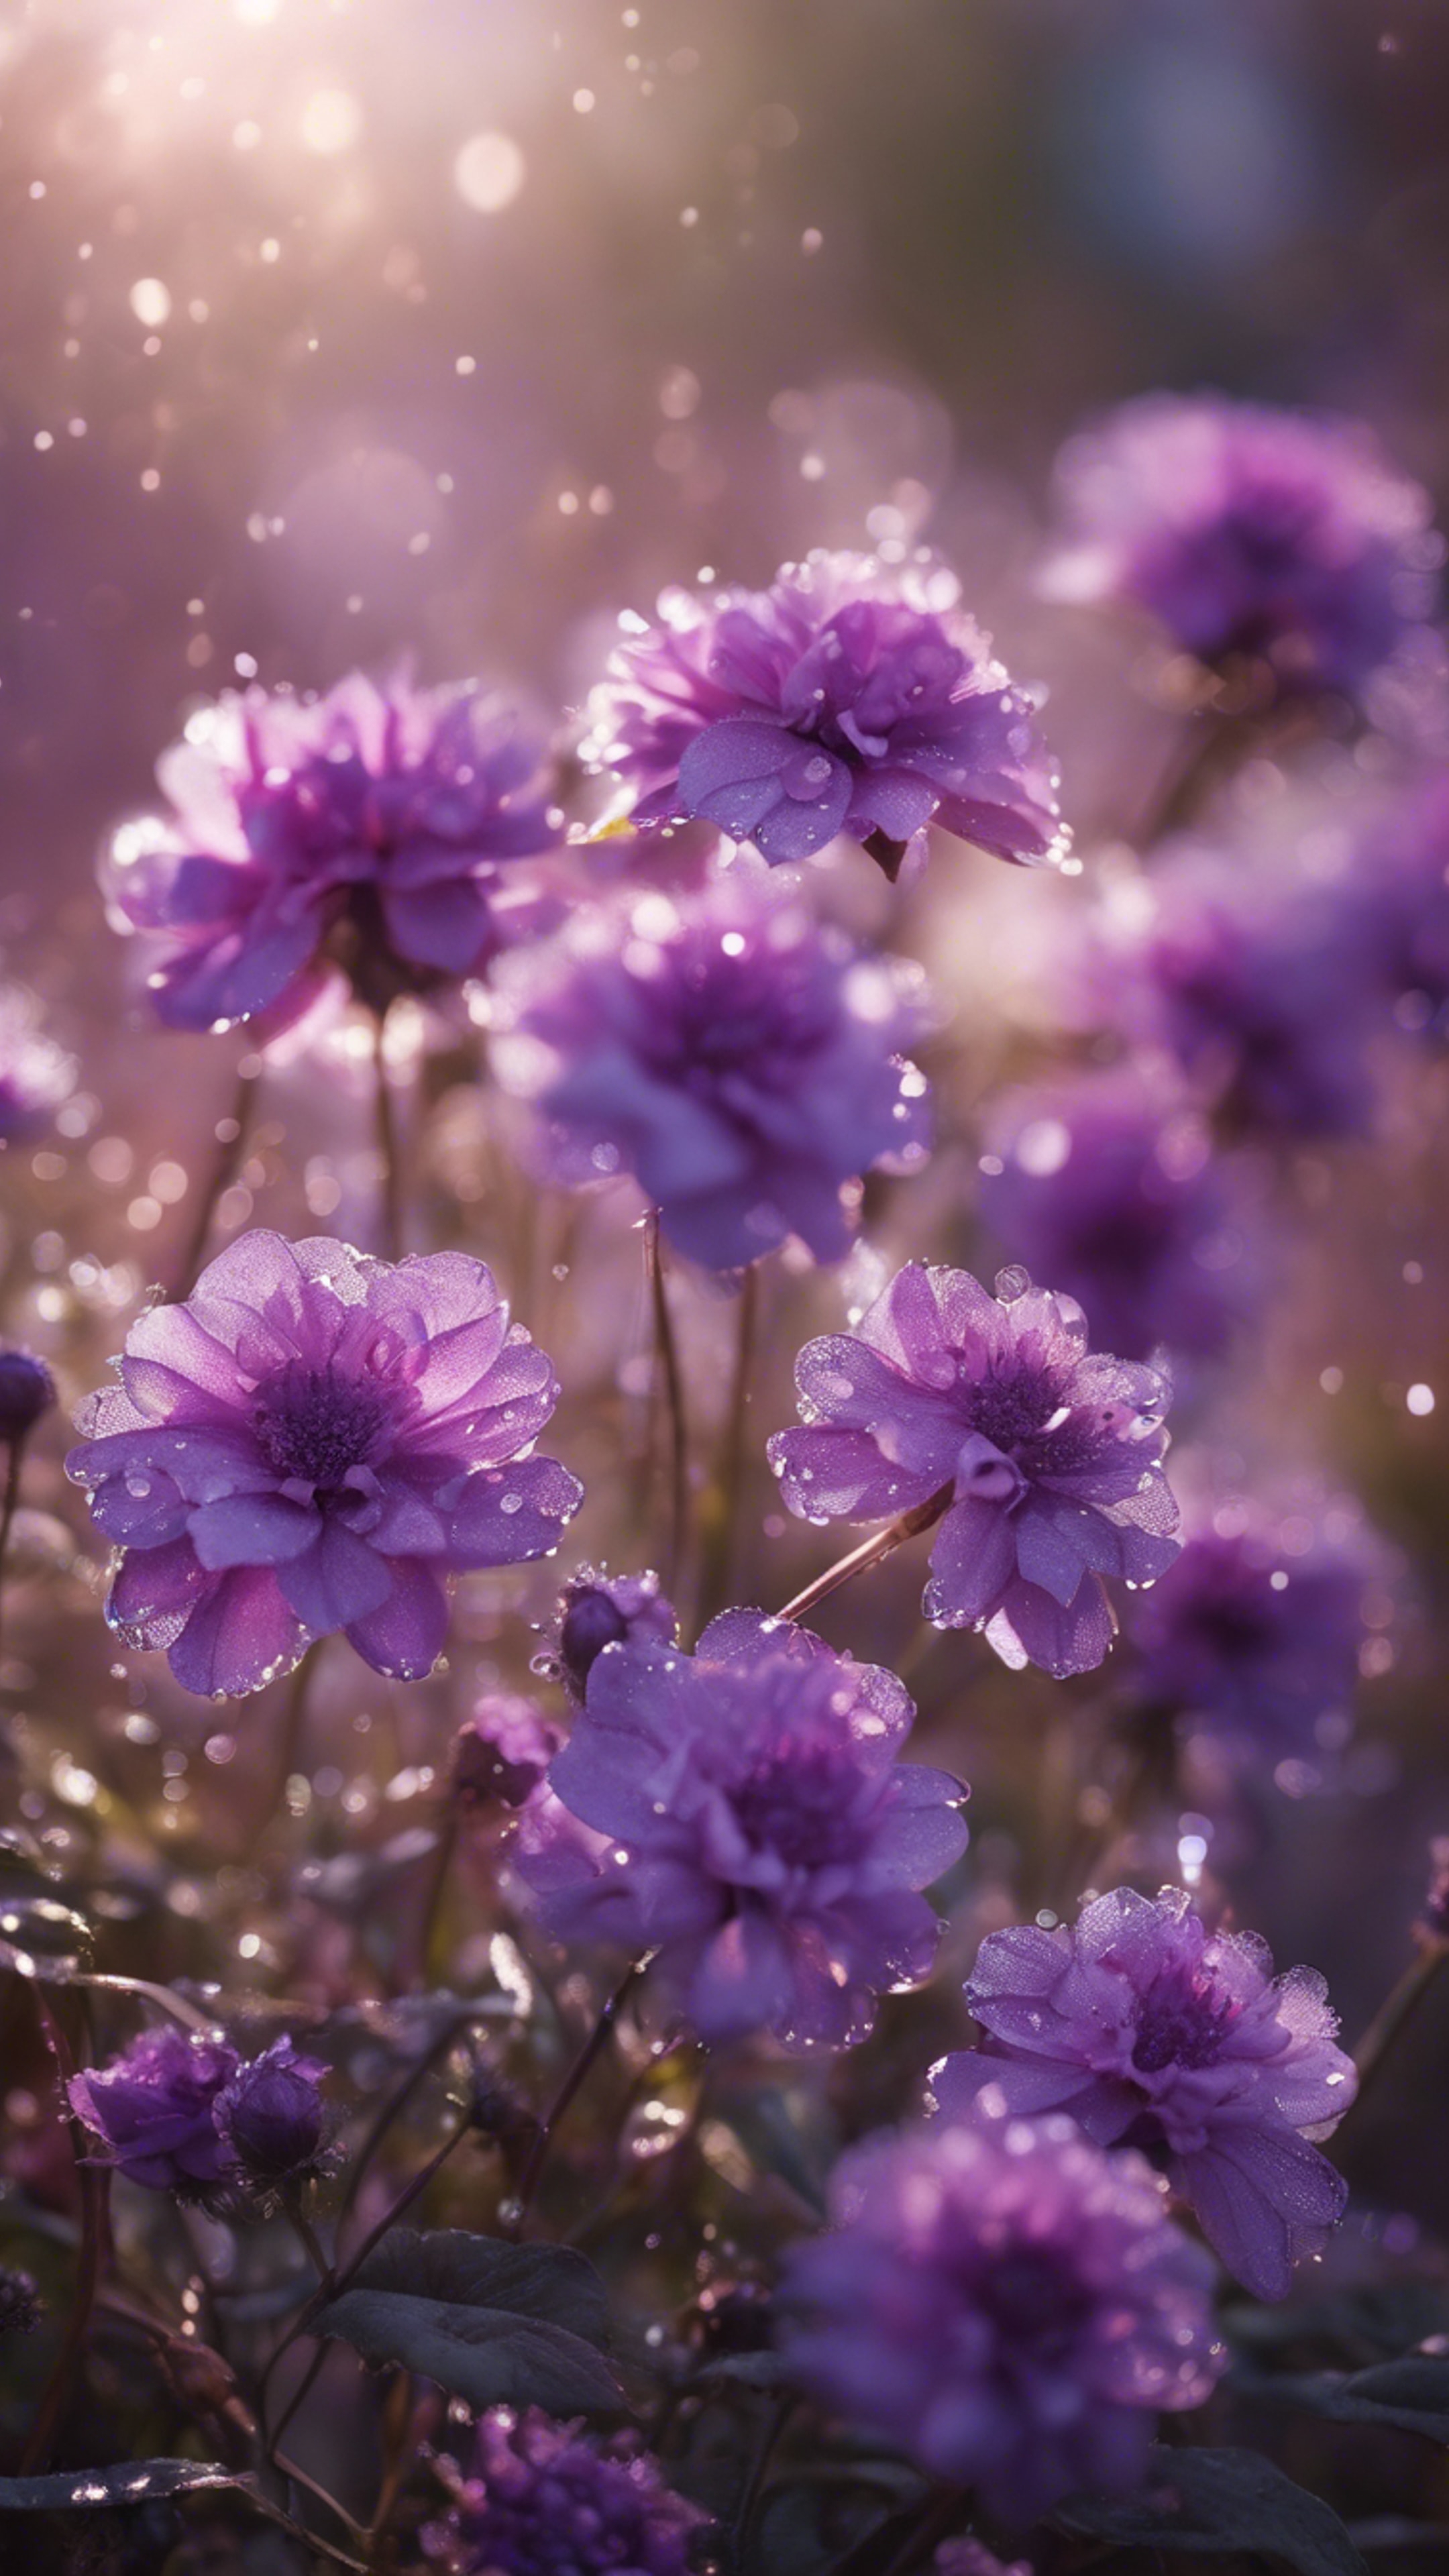 An impressive collage of purple flowers in full bloom, highlighted by sparkling morning dew. Tapet[23d1df20d4e341739cf3]